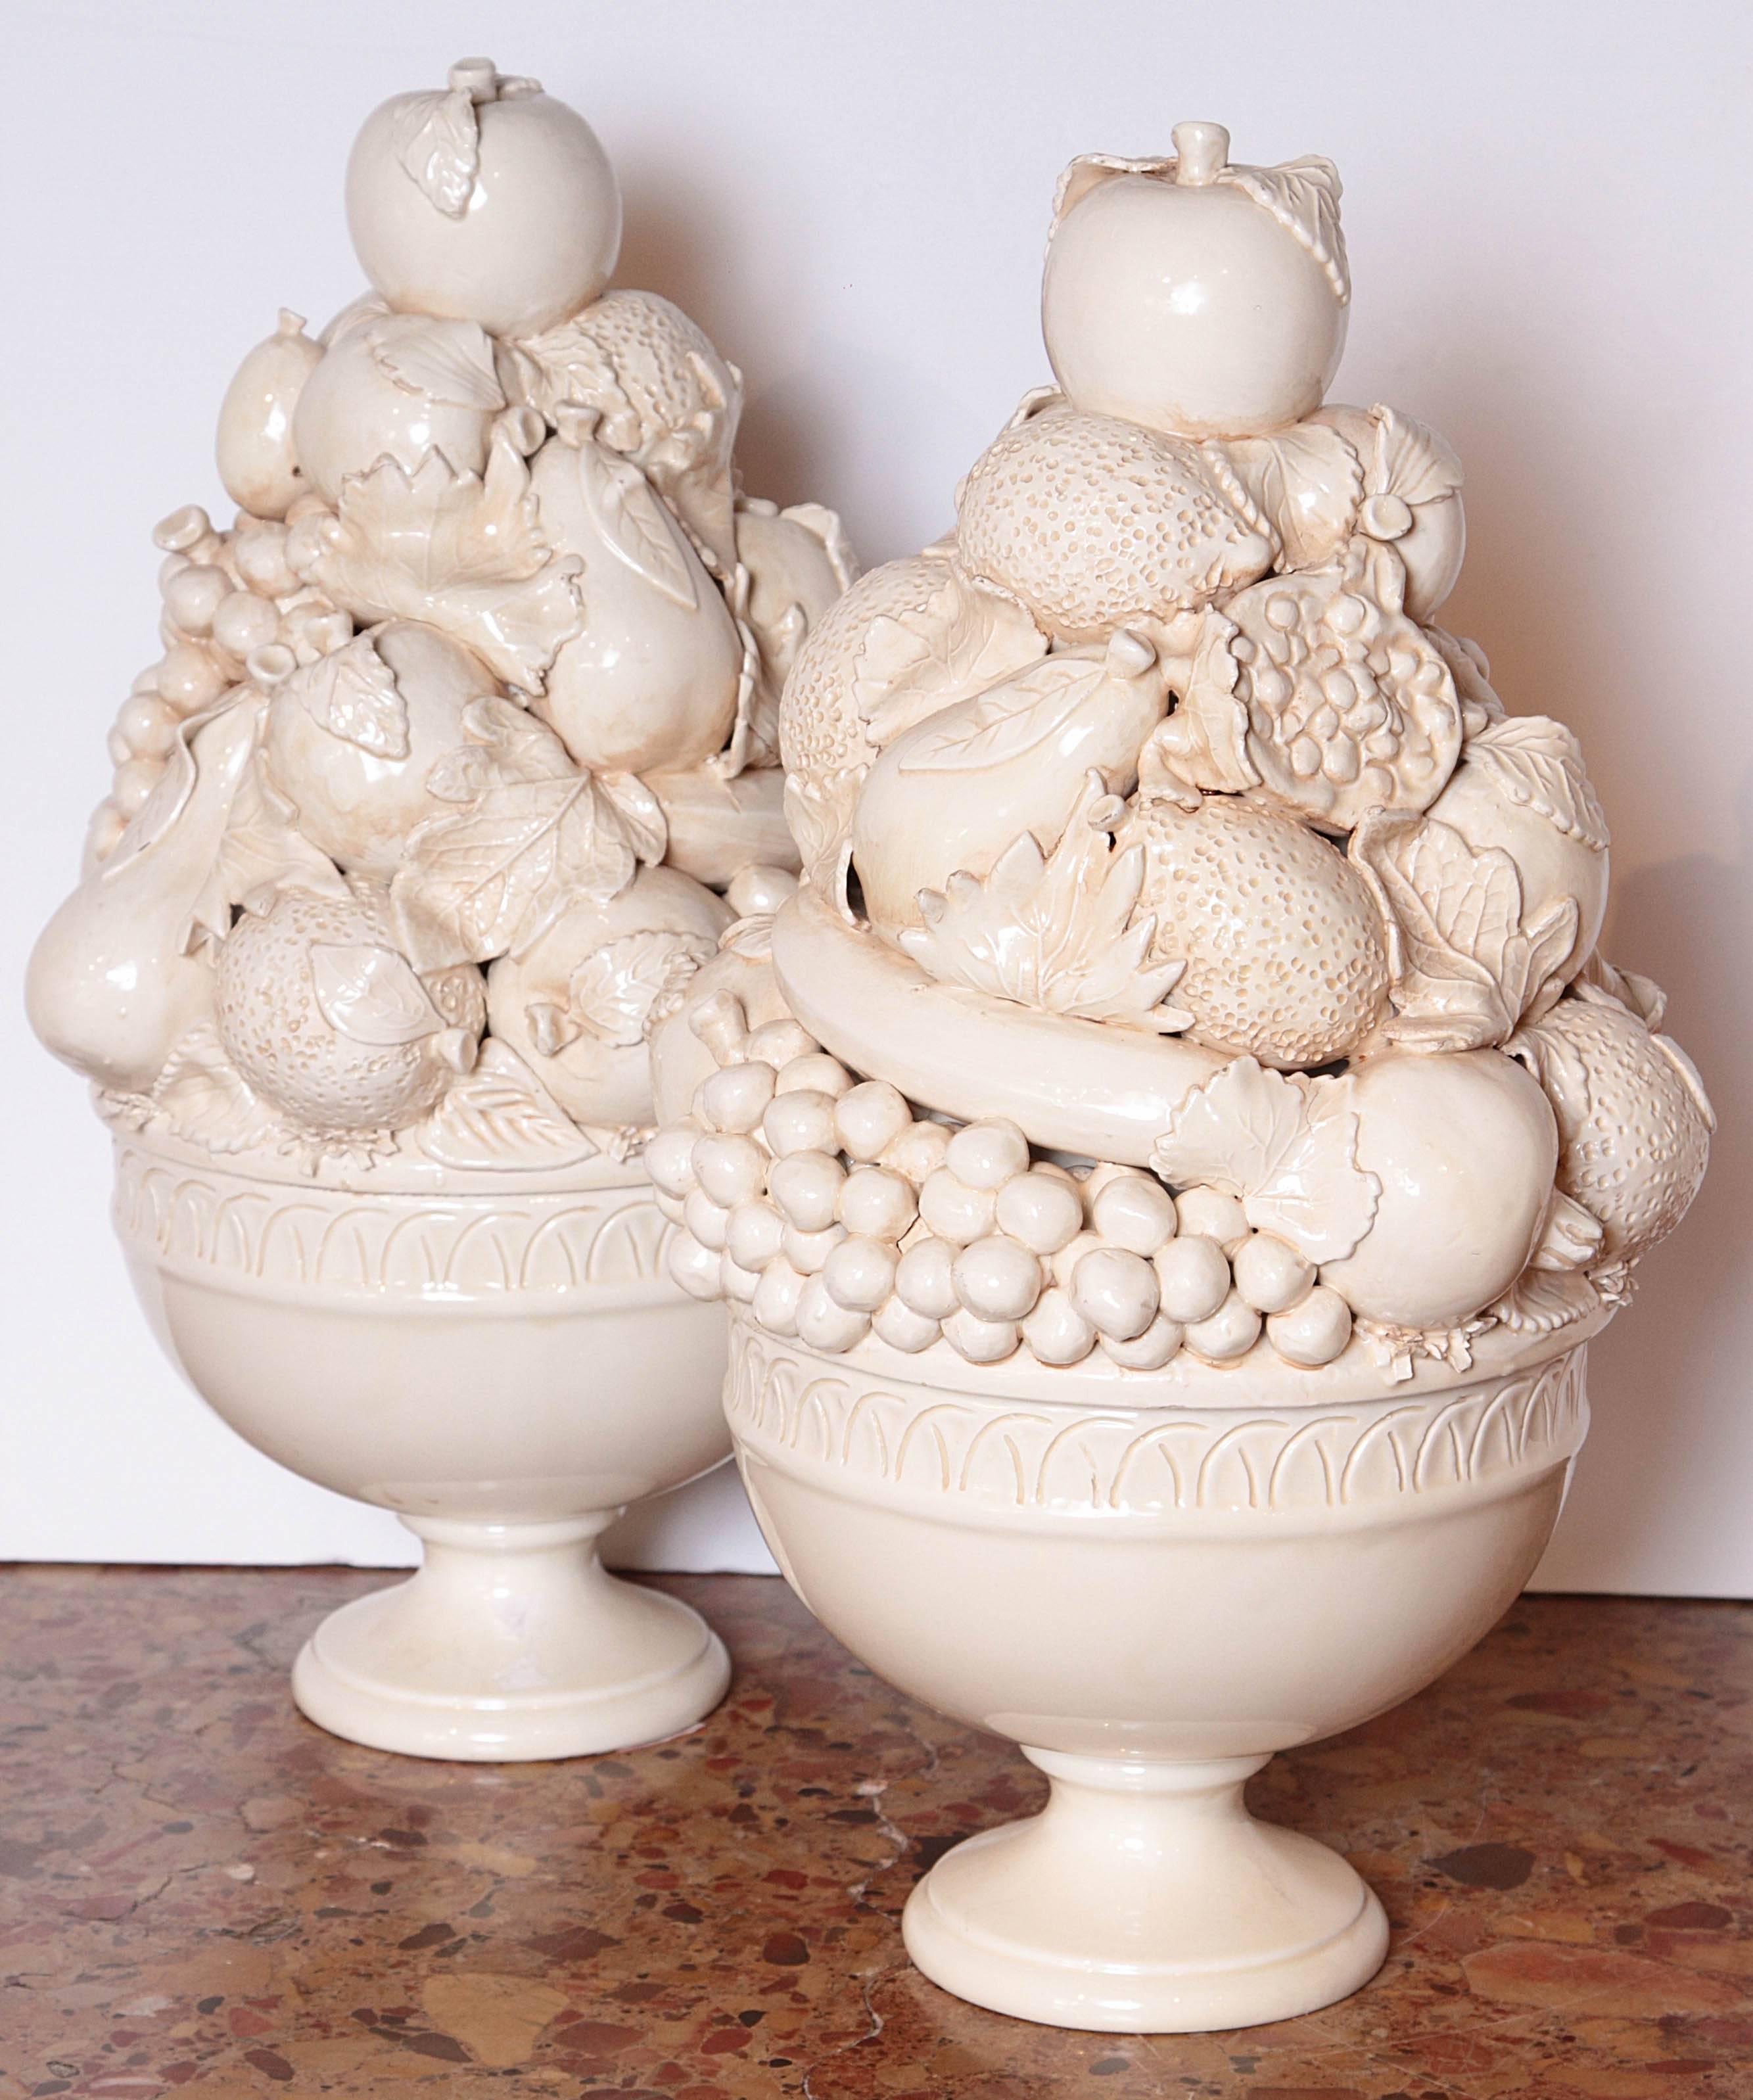 These Italian creamware pedestal bowls of fruit have been very realistically done. There are grapes, open pomegranates, bananas, oranges, apples and pears, with their leaves peeking through and curled over the fruit. The bowls’ rims have linear